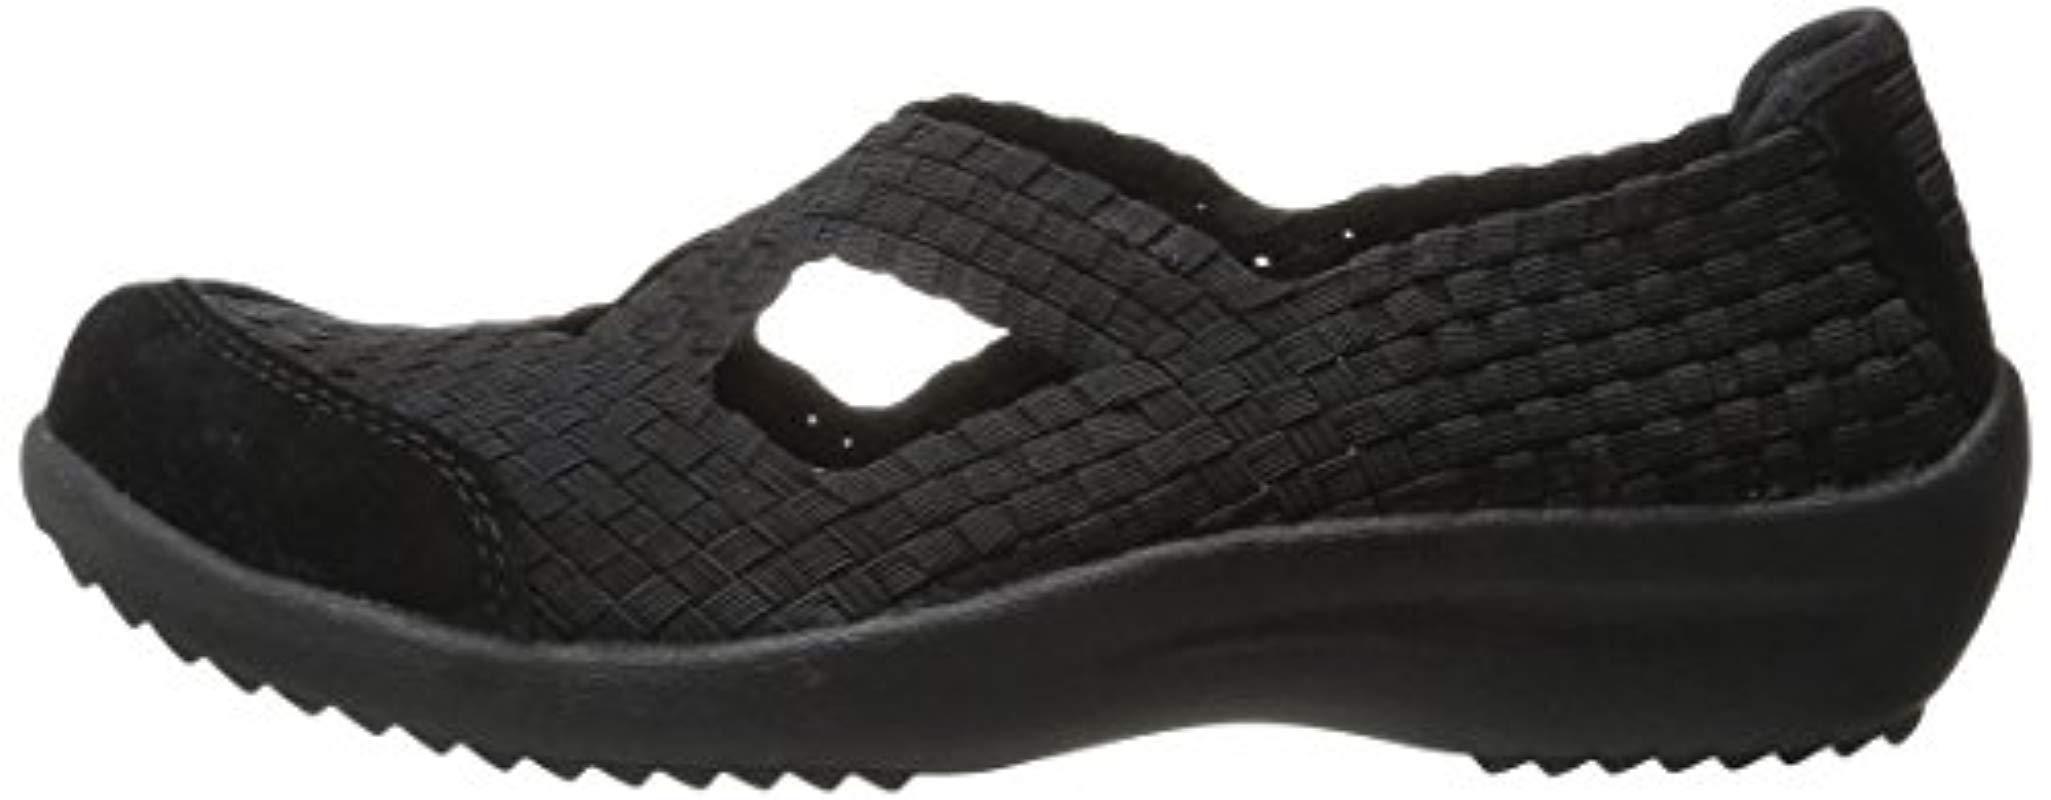 skechers relaxed fit savor entice memory foam woven sandals